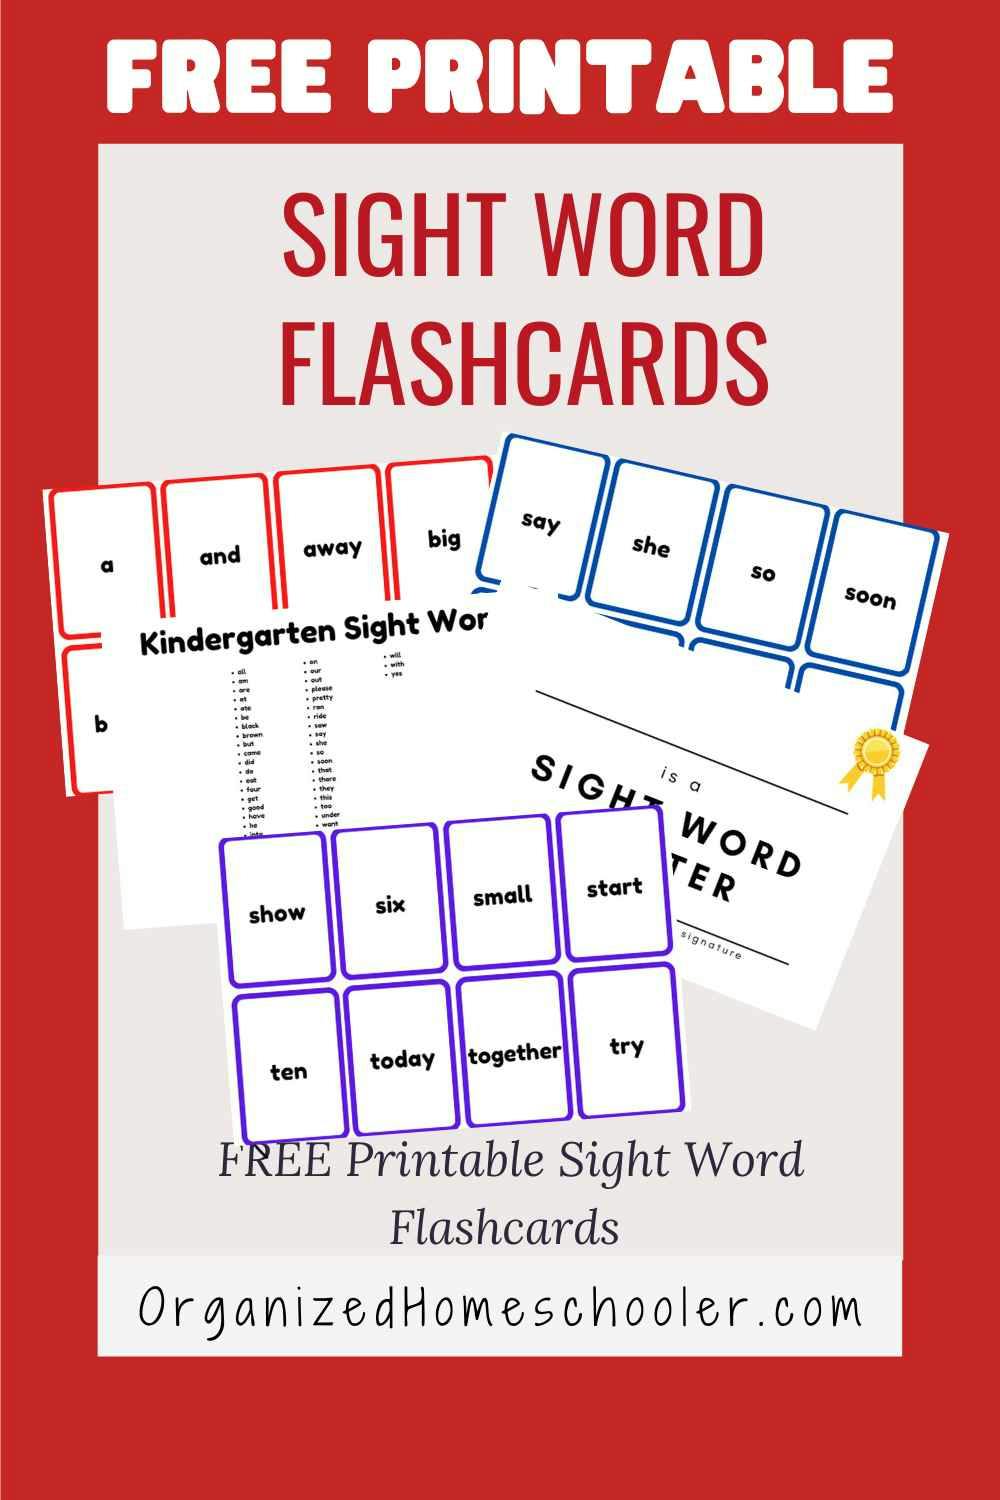 FREE Sight Word Flashcard Labels